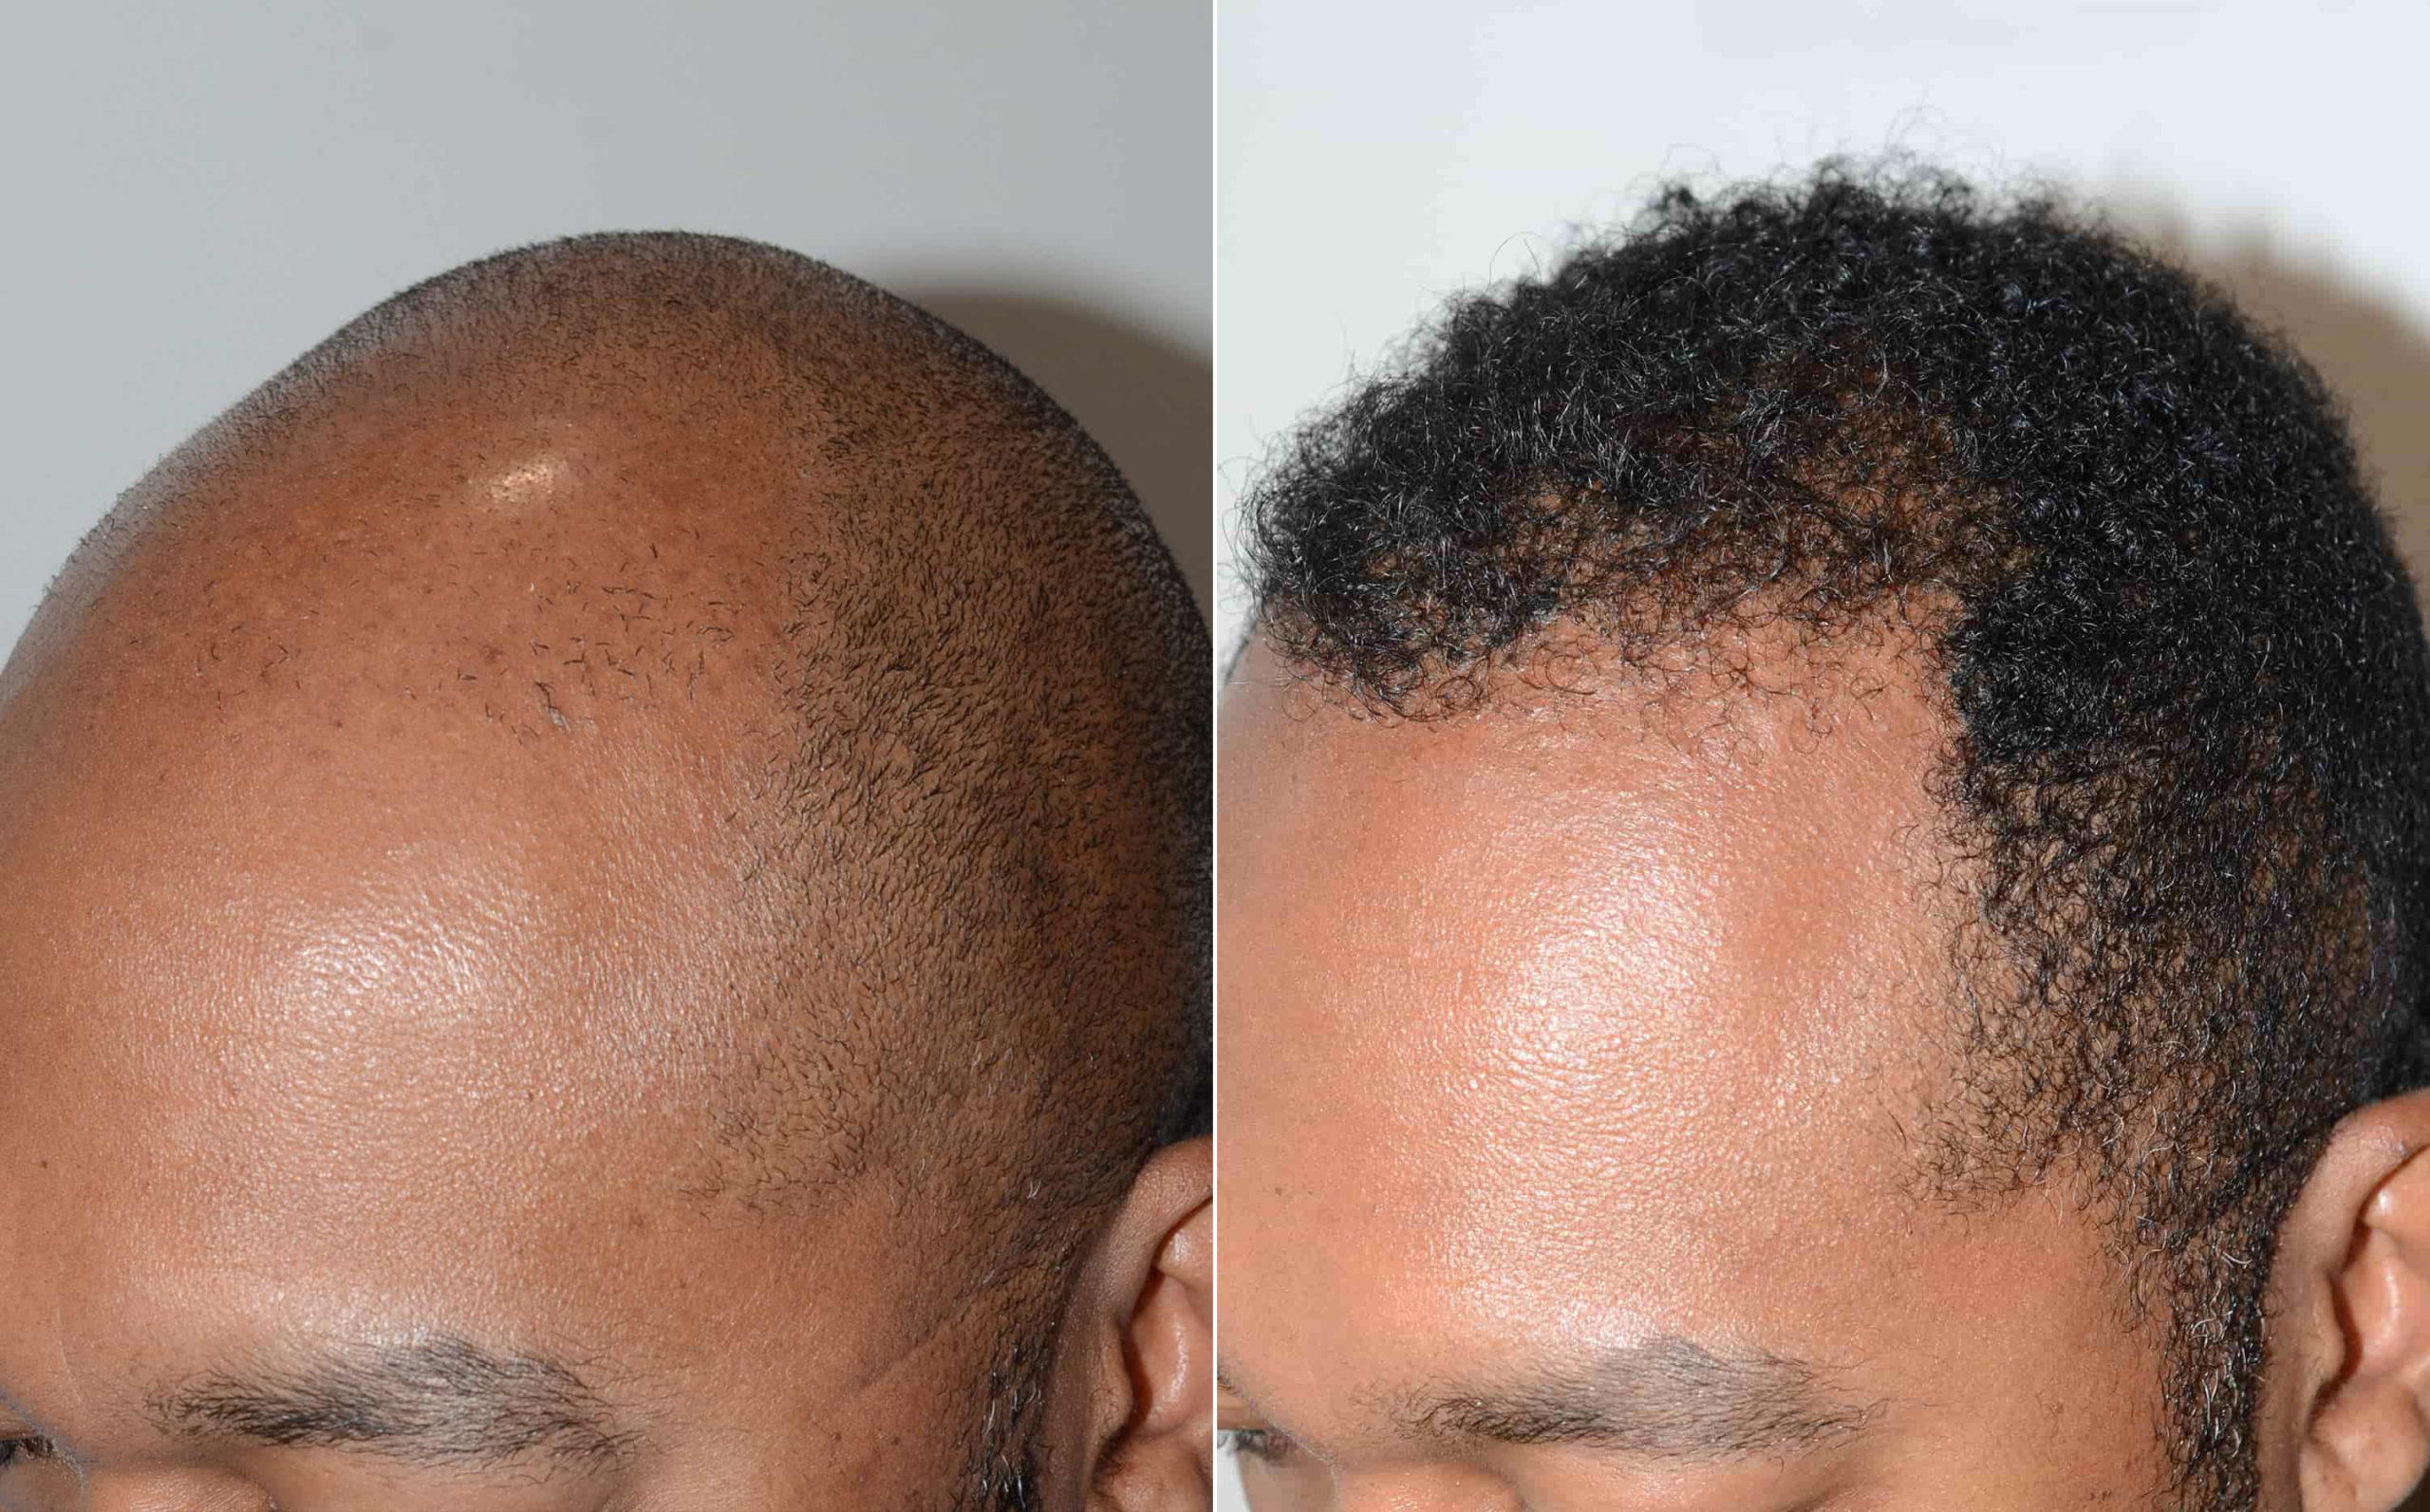 FUE Hair Transplants - This Is What Real Life Results Look Like